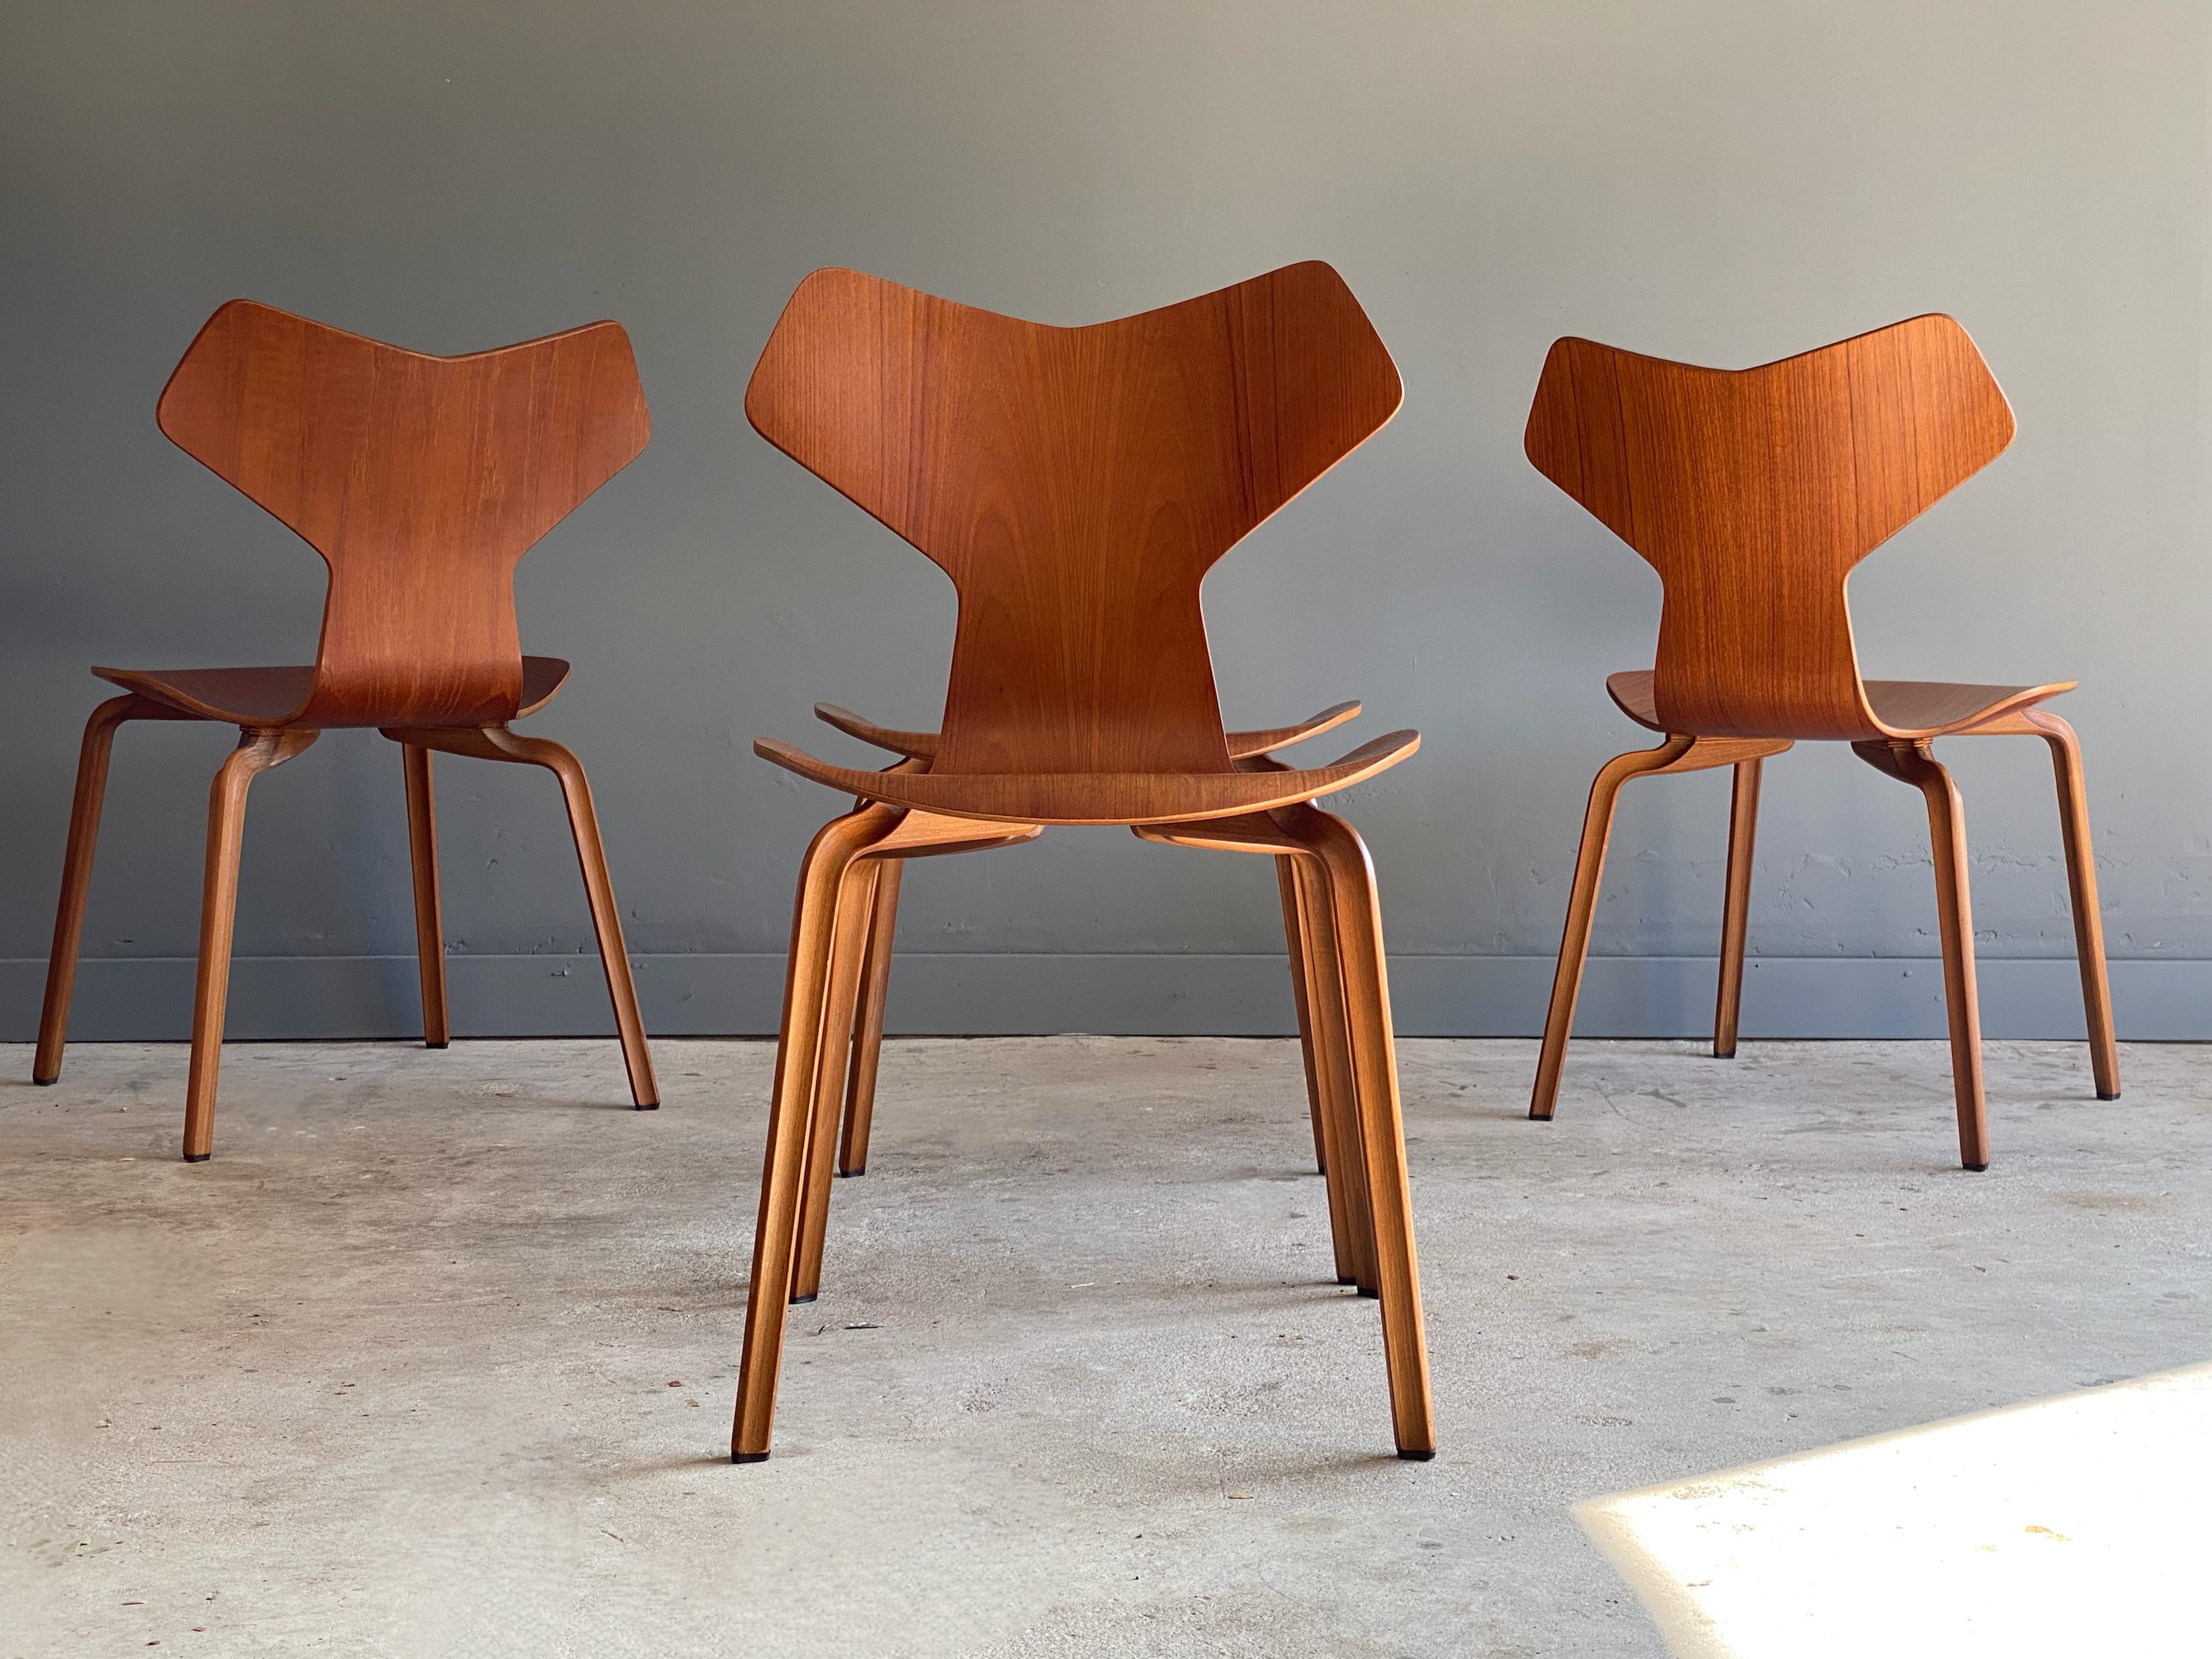 Iconic set of Arne Jacobsen “Grand Prix” chairs. Originally known as the Model 4130, the chair was renamed after it won the Grand Prix at the XI. Triennale di Milano in 1957. The chair is produced by Fritz Hansen out of teak. These early example